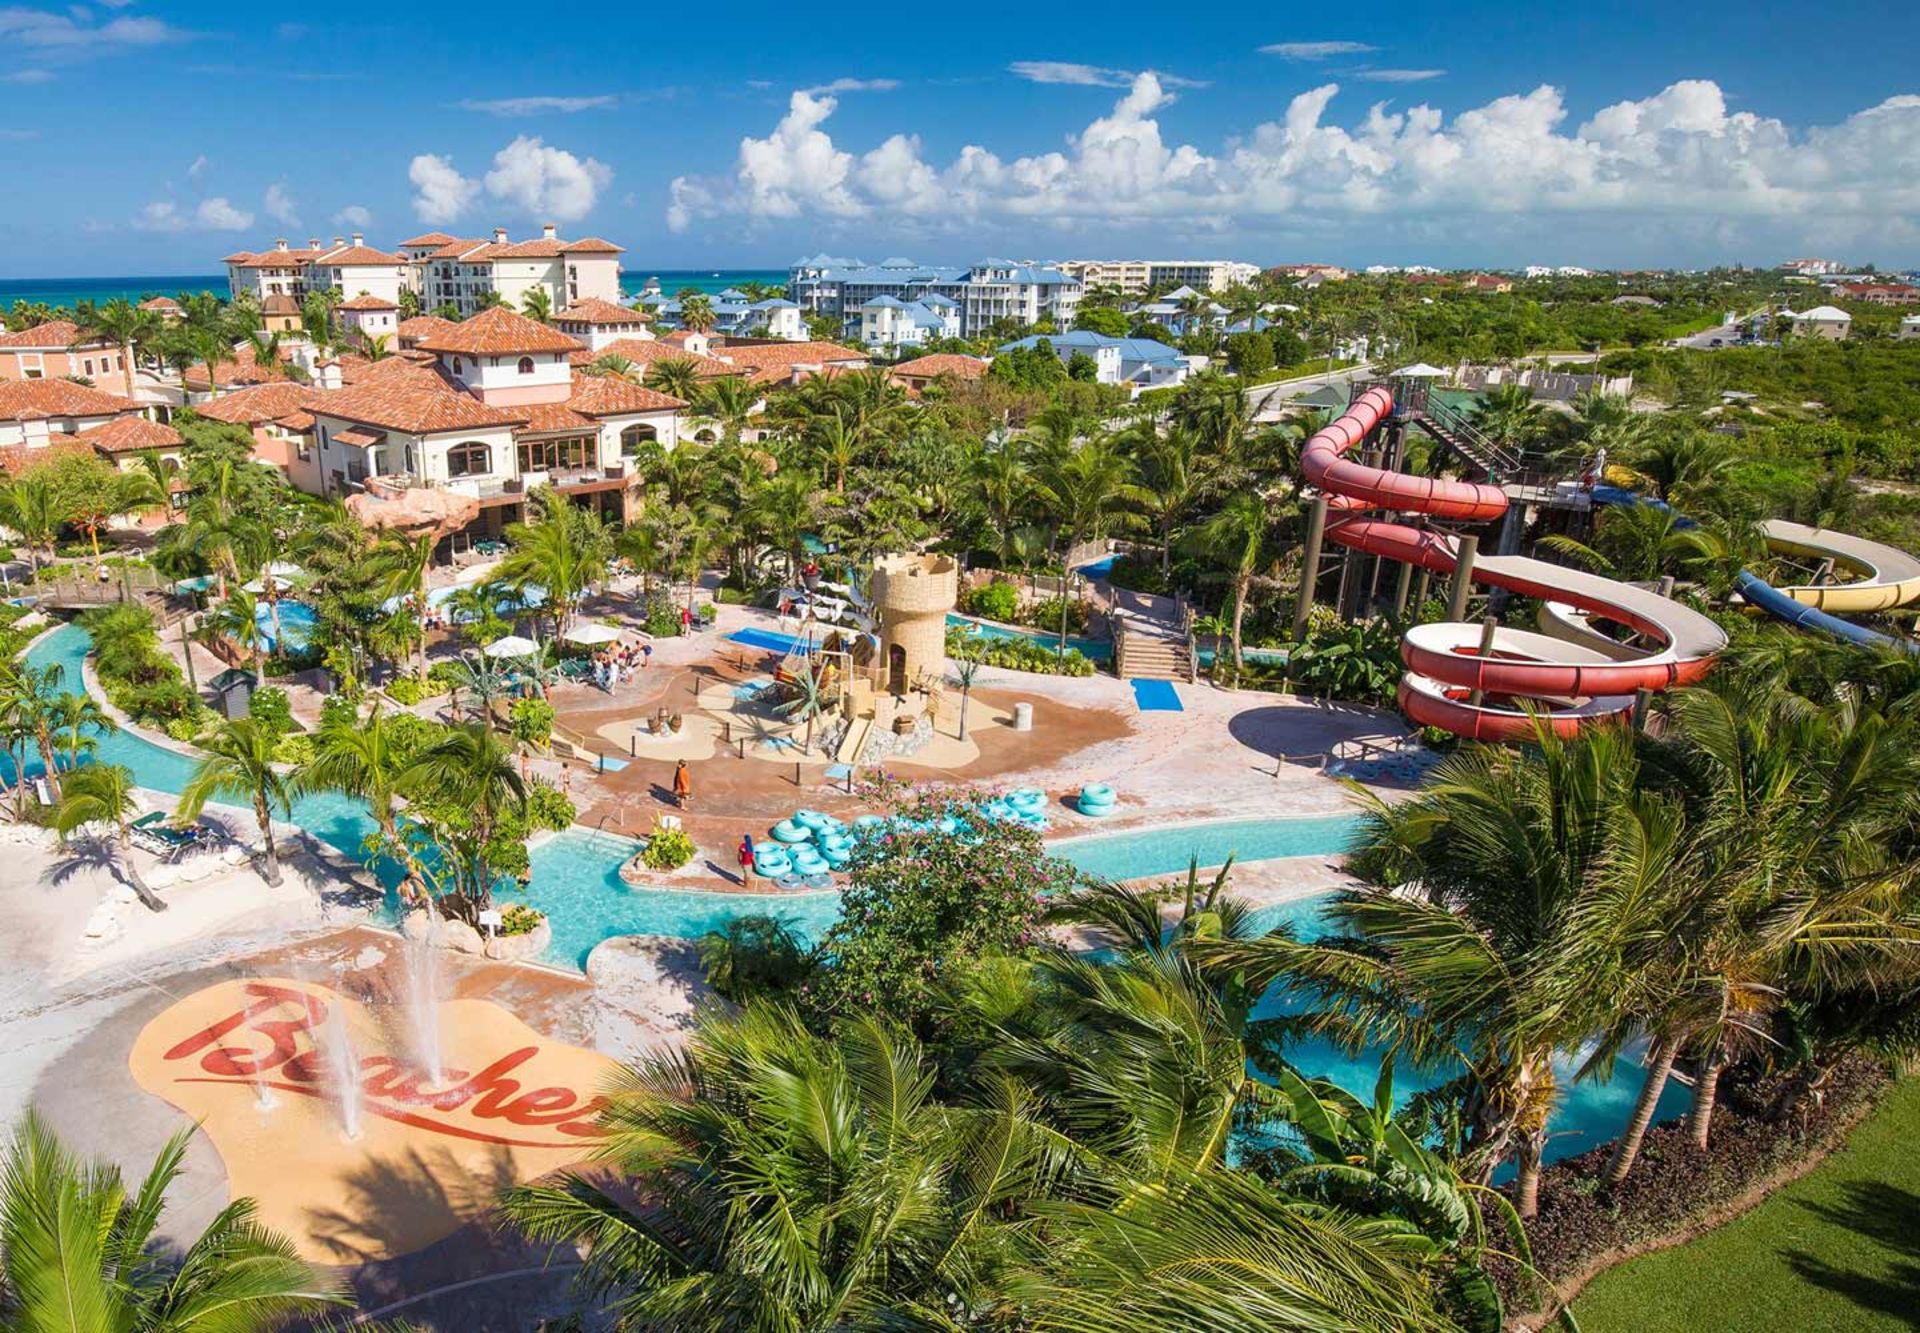 Beaches, Turks and Caicos luxury all inclusive family holidays in the